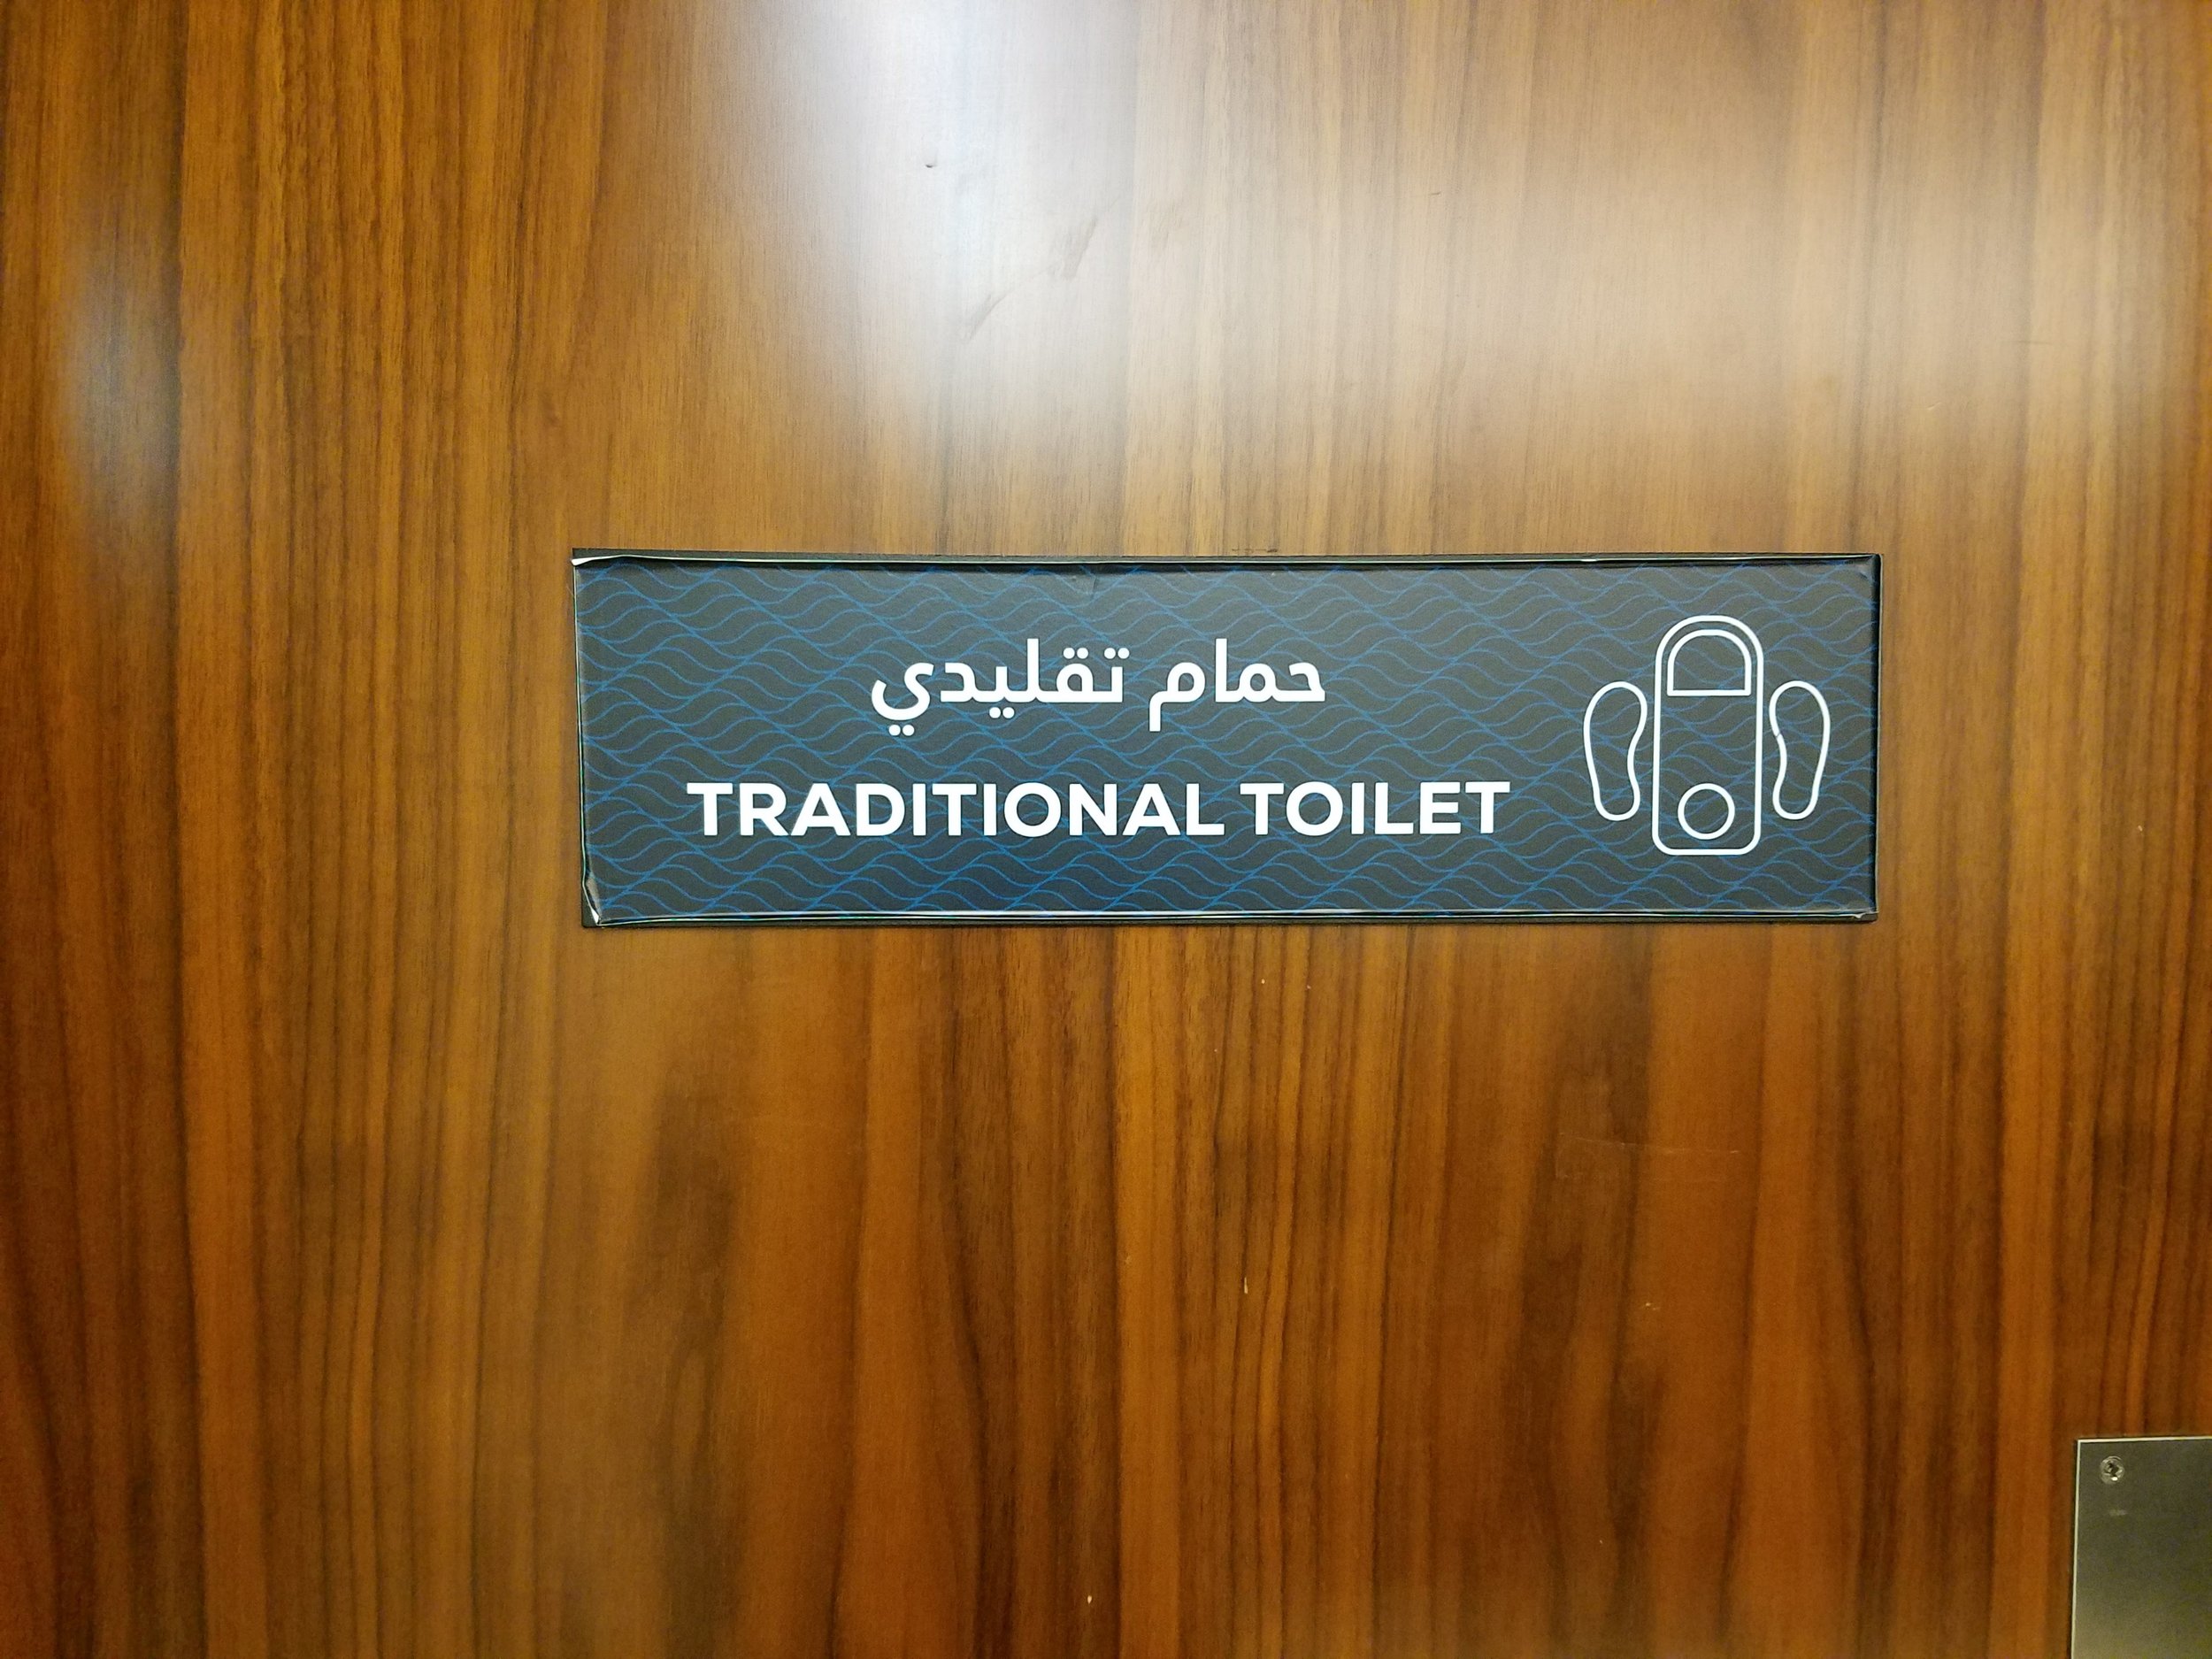   You can opt for a traditional squat toilet over a seated toilet in the United Arab Emirates, if you so desire  